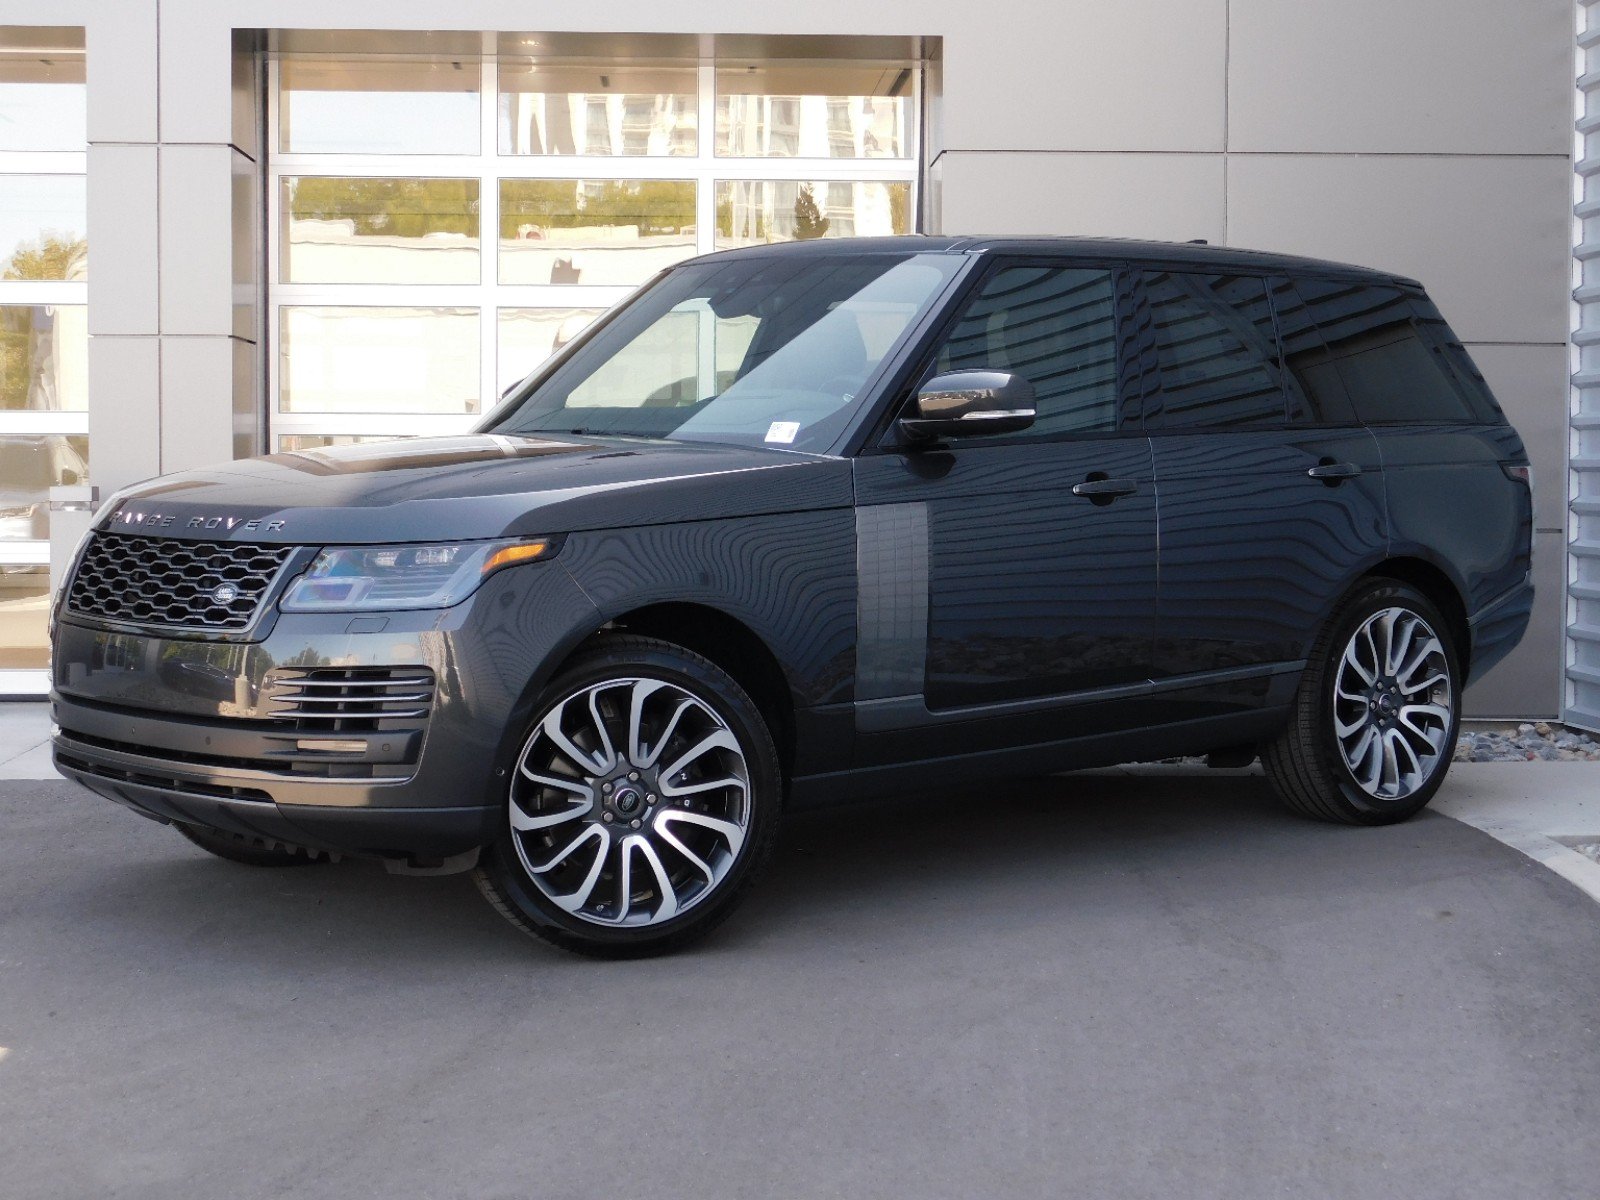 New Land Rover Range Rover Autobiography With Navigation 4wd